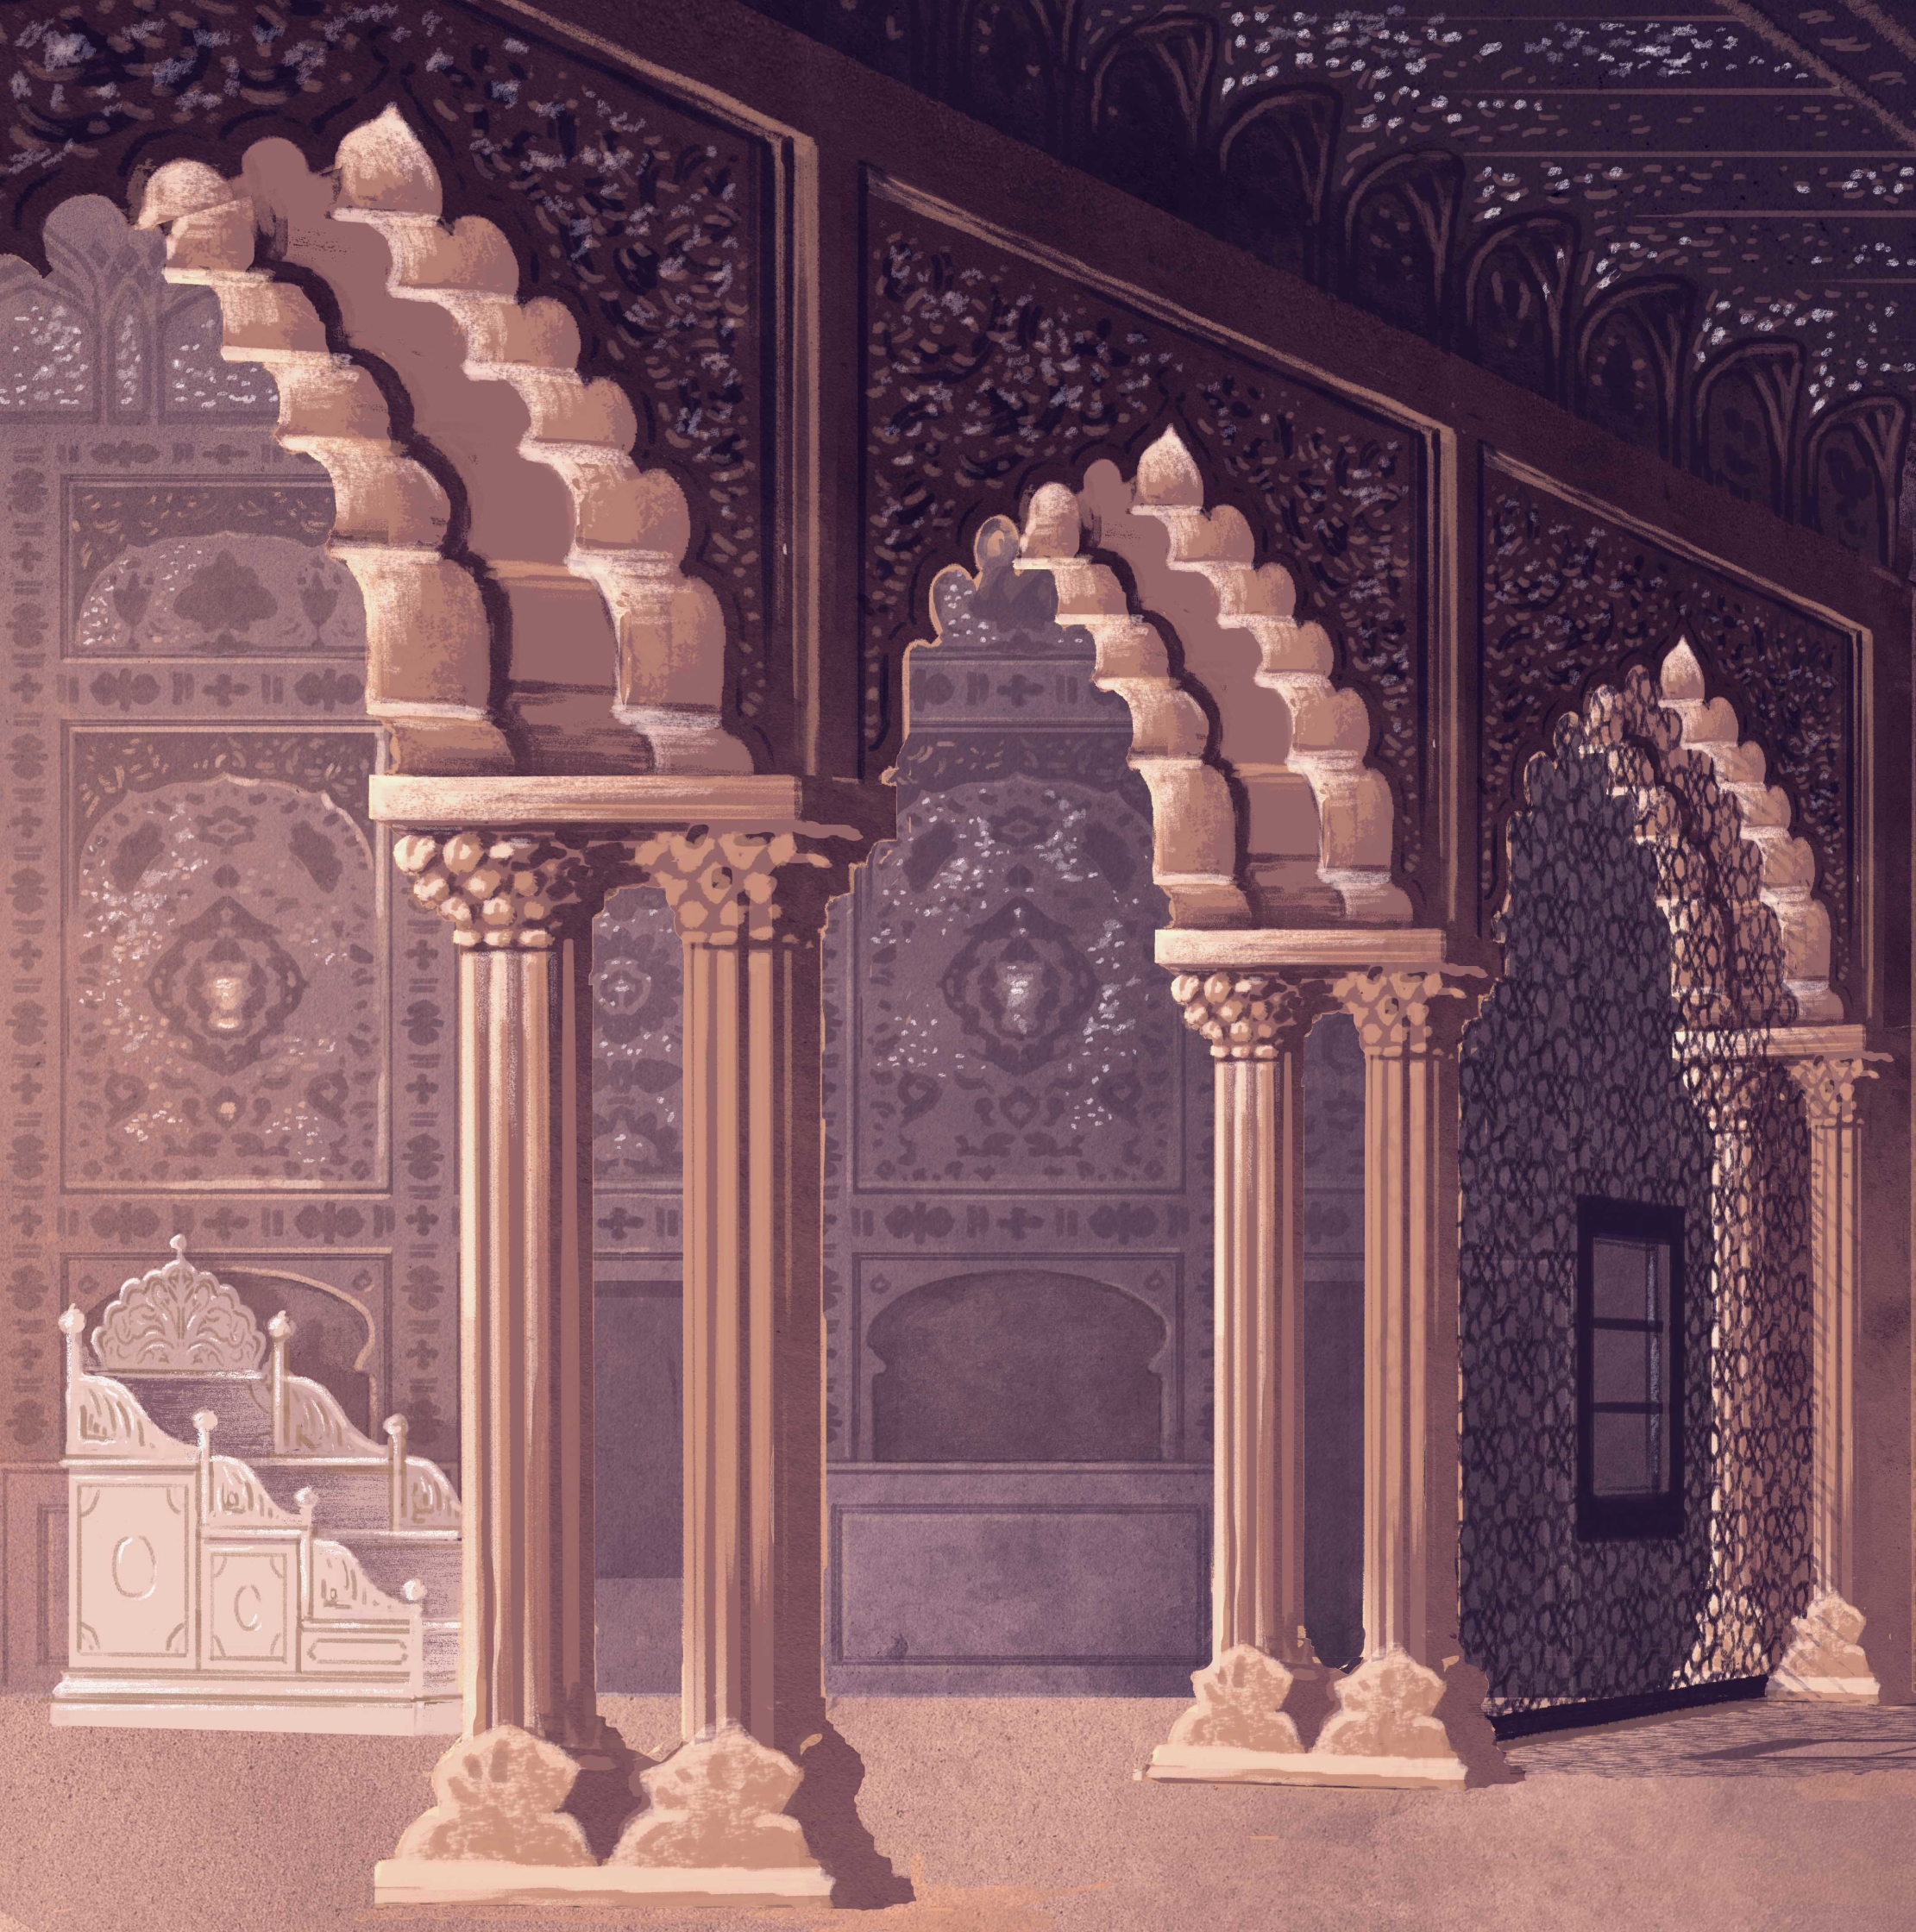 Theatre Backdrop mughal court arches.jpg